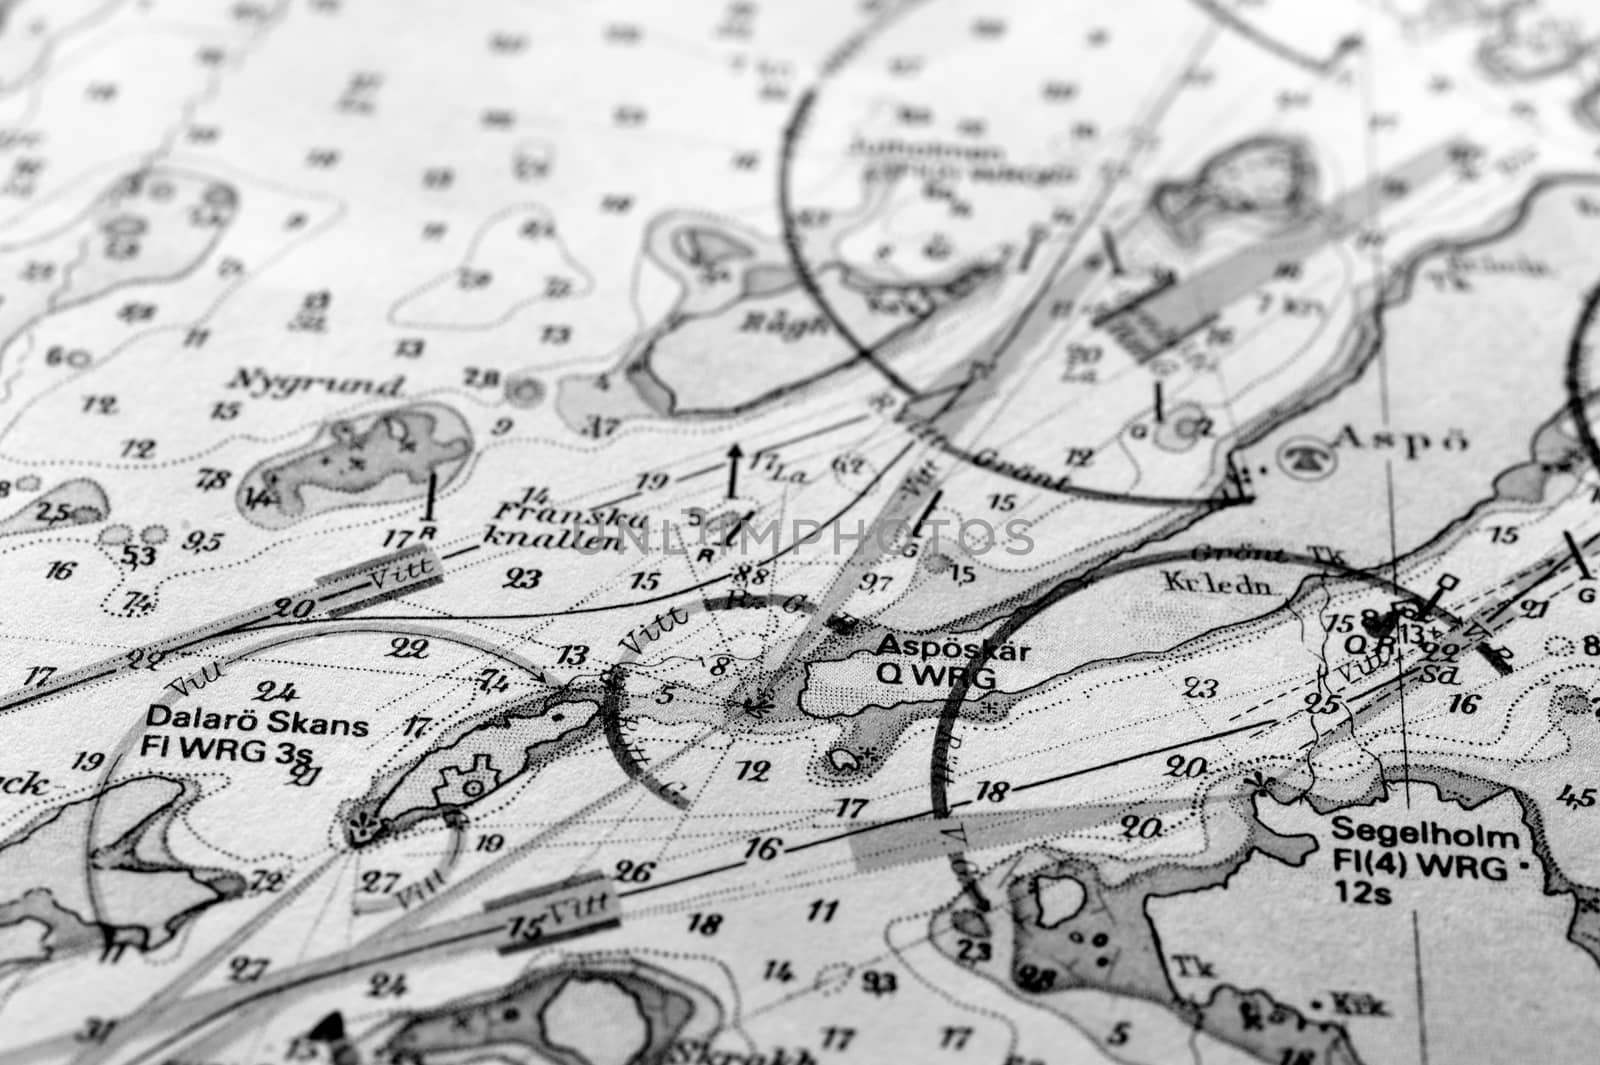 Macro shot of a old marine chart, detailing Stockholm archipelago by a40757